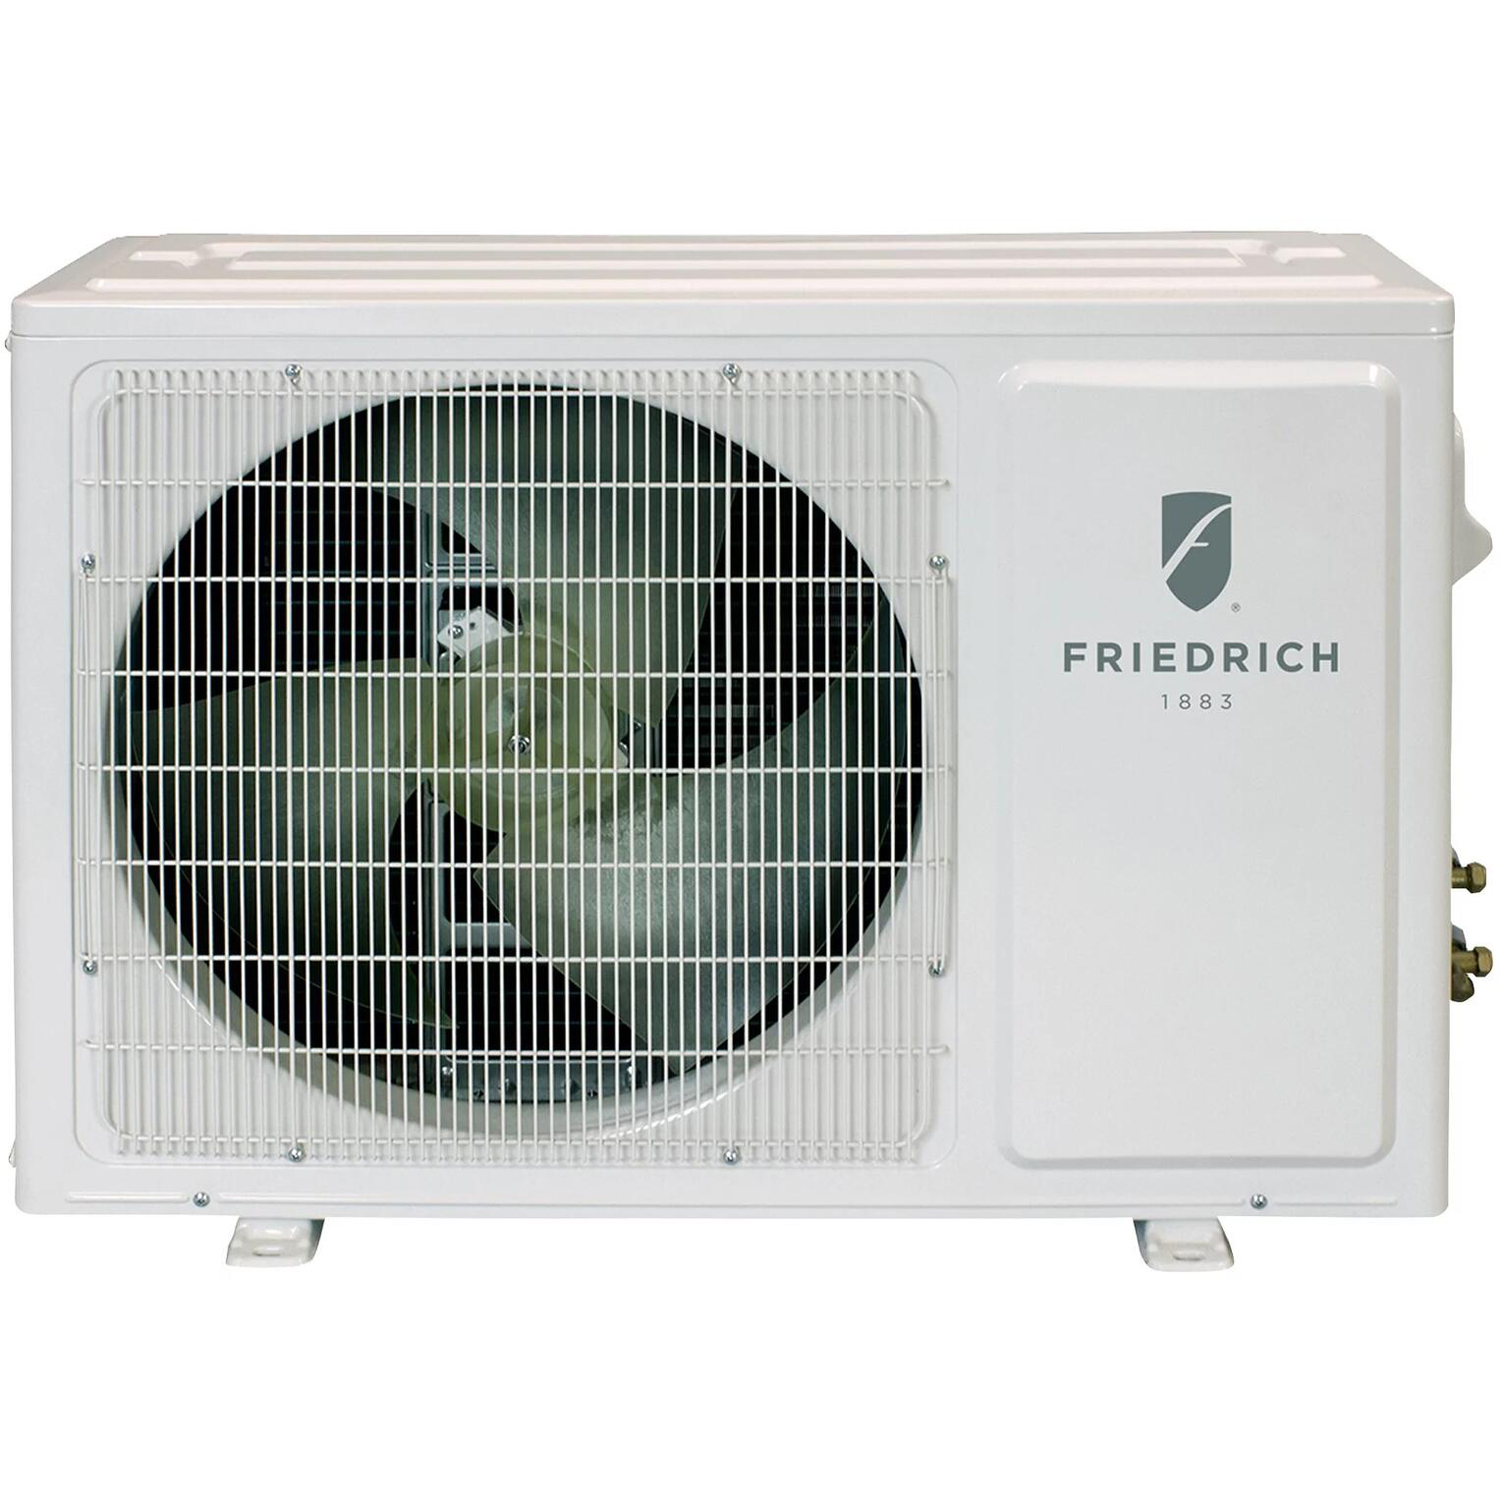 Photos - Other large household technique Friedrich Floating Air Pro Outdoor 12000 BTU Air Conditioner and Heating ( 